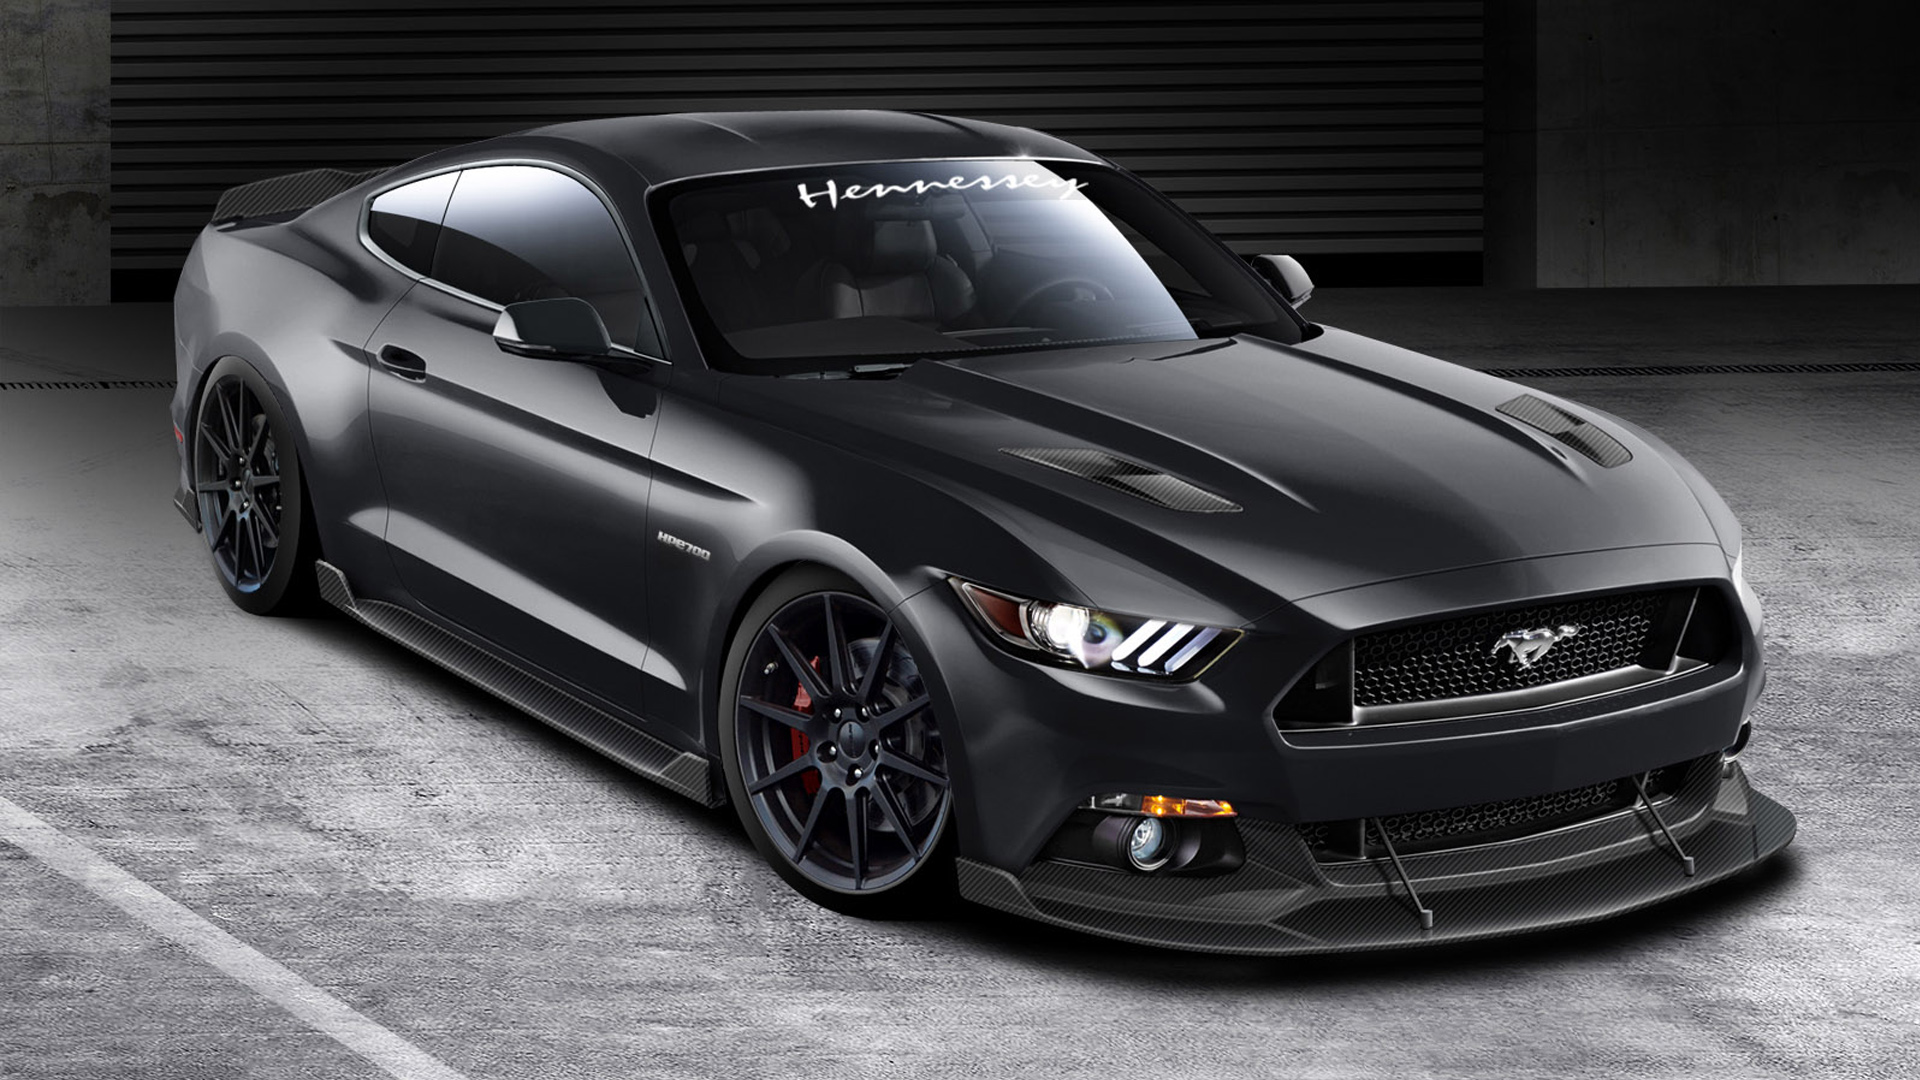 2015 Hennessey Ford Mustang GT Wallpaper HD Car Wallpapers ID 4975